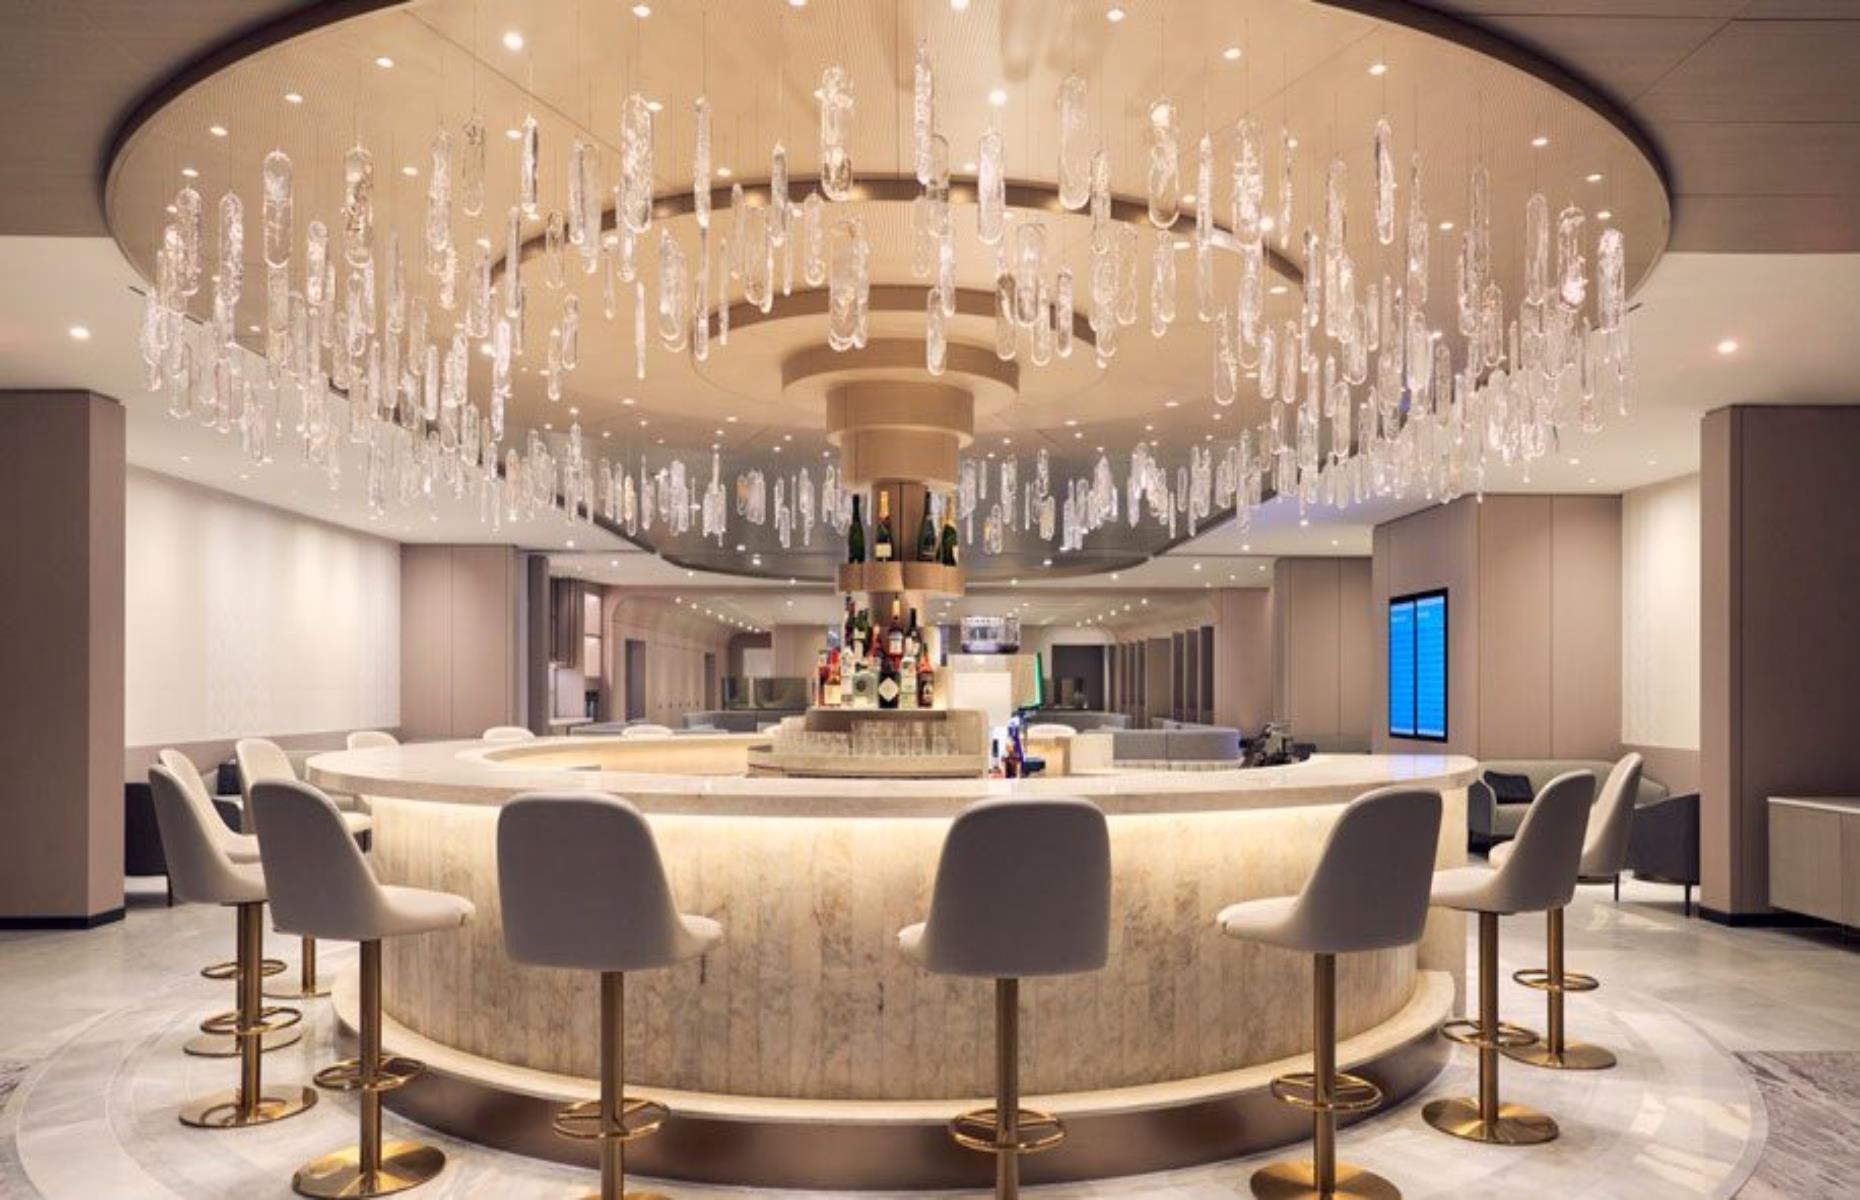 British Airways moved its New York JFK airport operations from Terminal 7 to the upgraded Terminal 8 in 2023, replacing its old lounge with a pair of swanky new ones – the Chelsea Lounge and the Soho Lounge – shared with American Airlines and reserved only for the most exclusive customers.